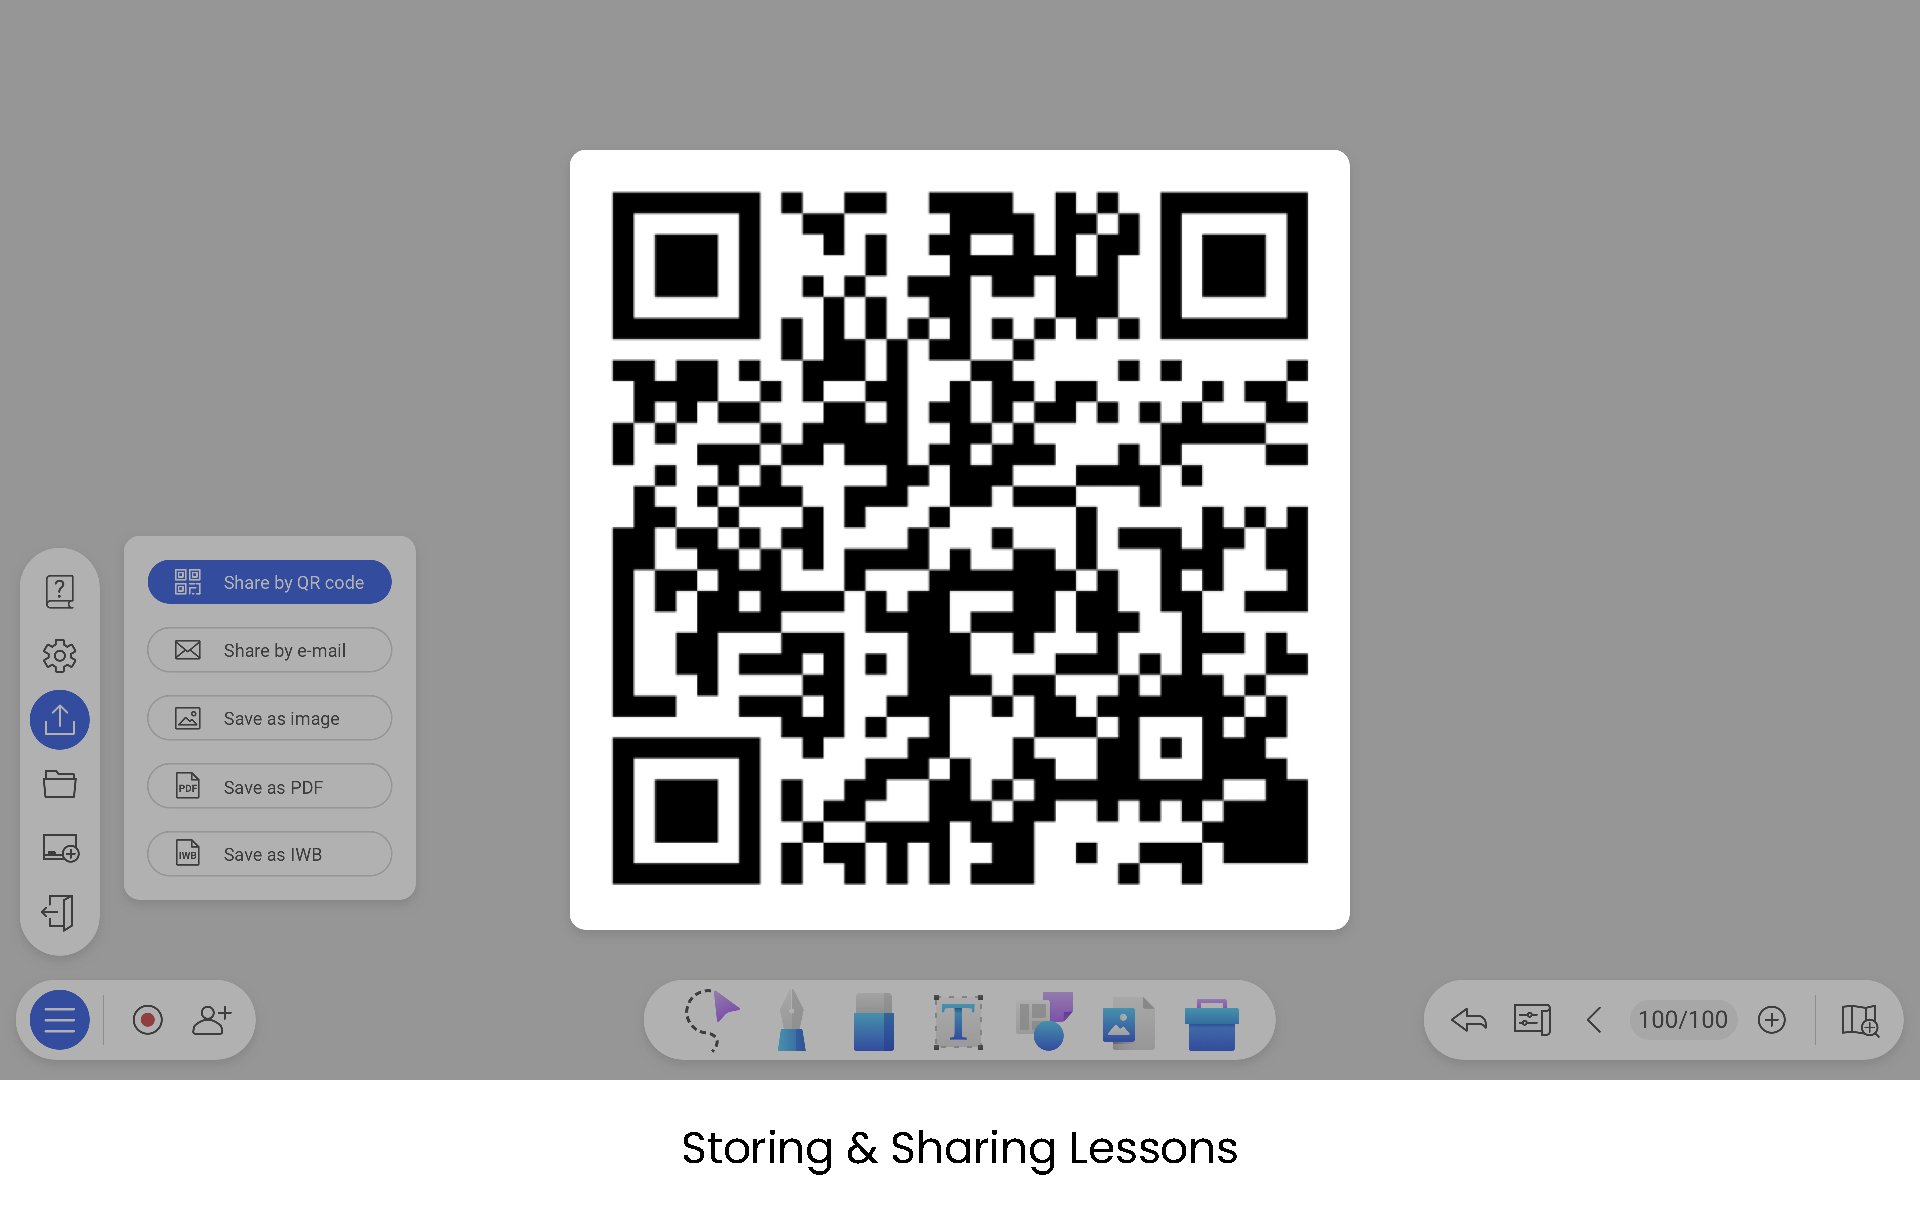 Teacher can share lessons to students via QR code generated from BenQ EZWrite 6 whiteboard software.